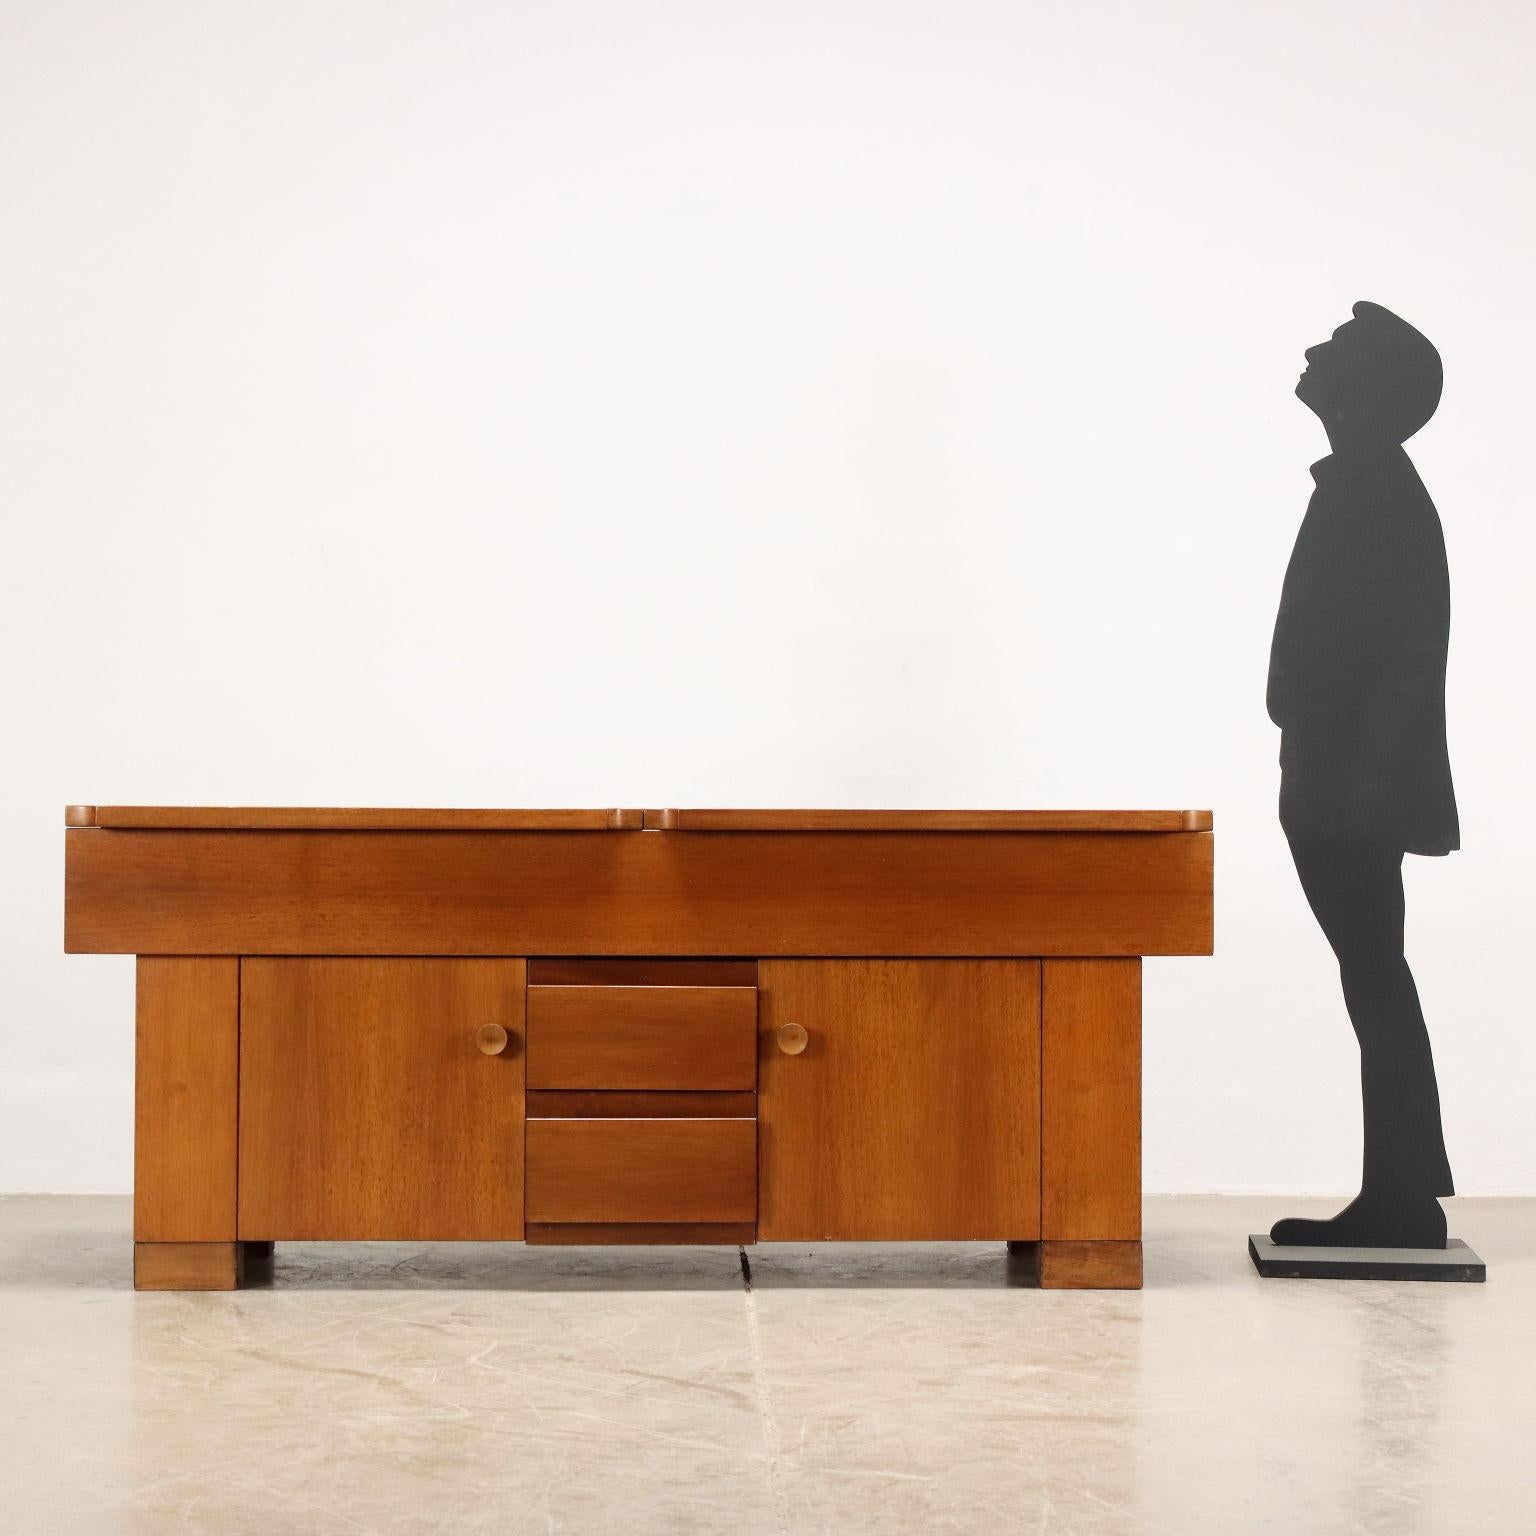 Sideboard with hinged doors and exposed drawers, designed by Michelucci in 1964; walnut veneered wood.